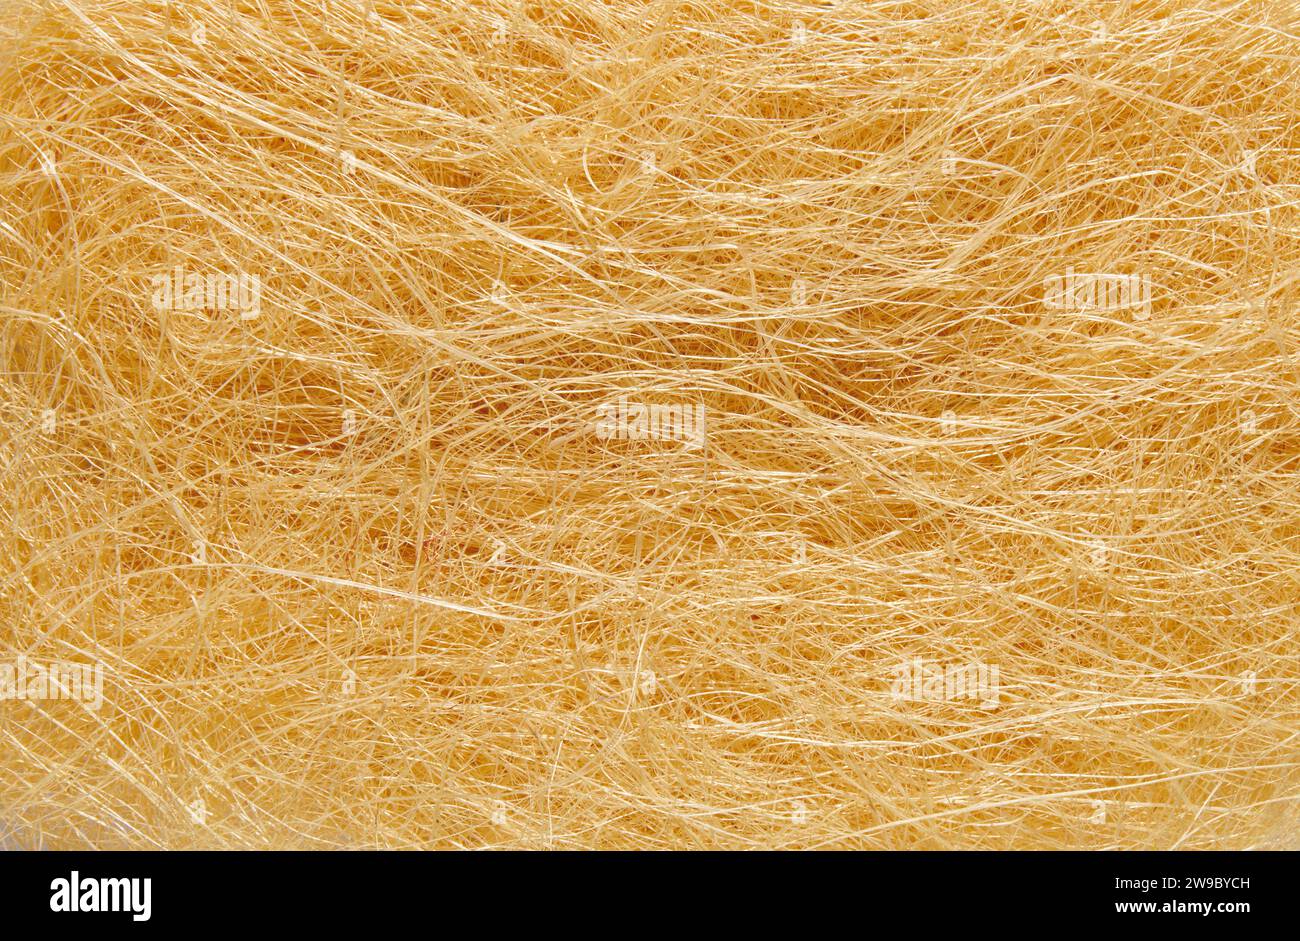 Closeup of abstract yellow fibers background representing the concept of complexity Stock Photo